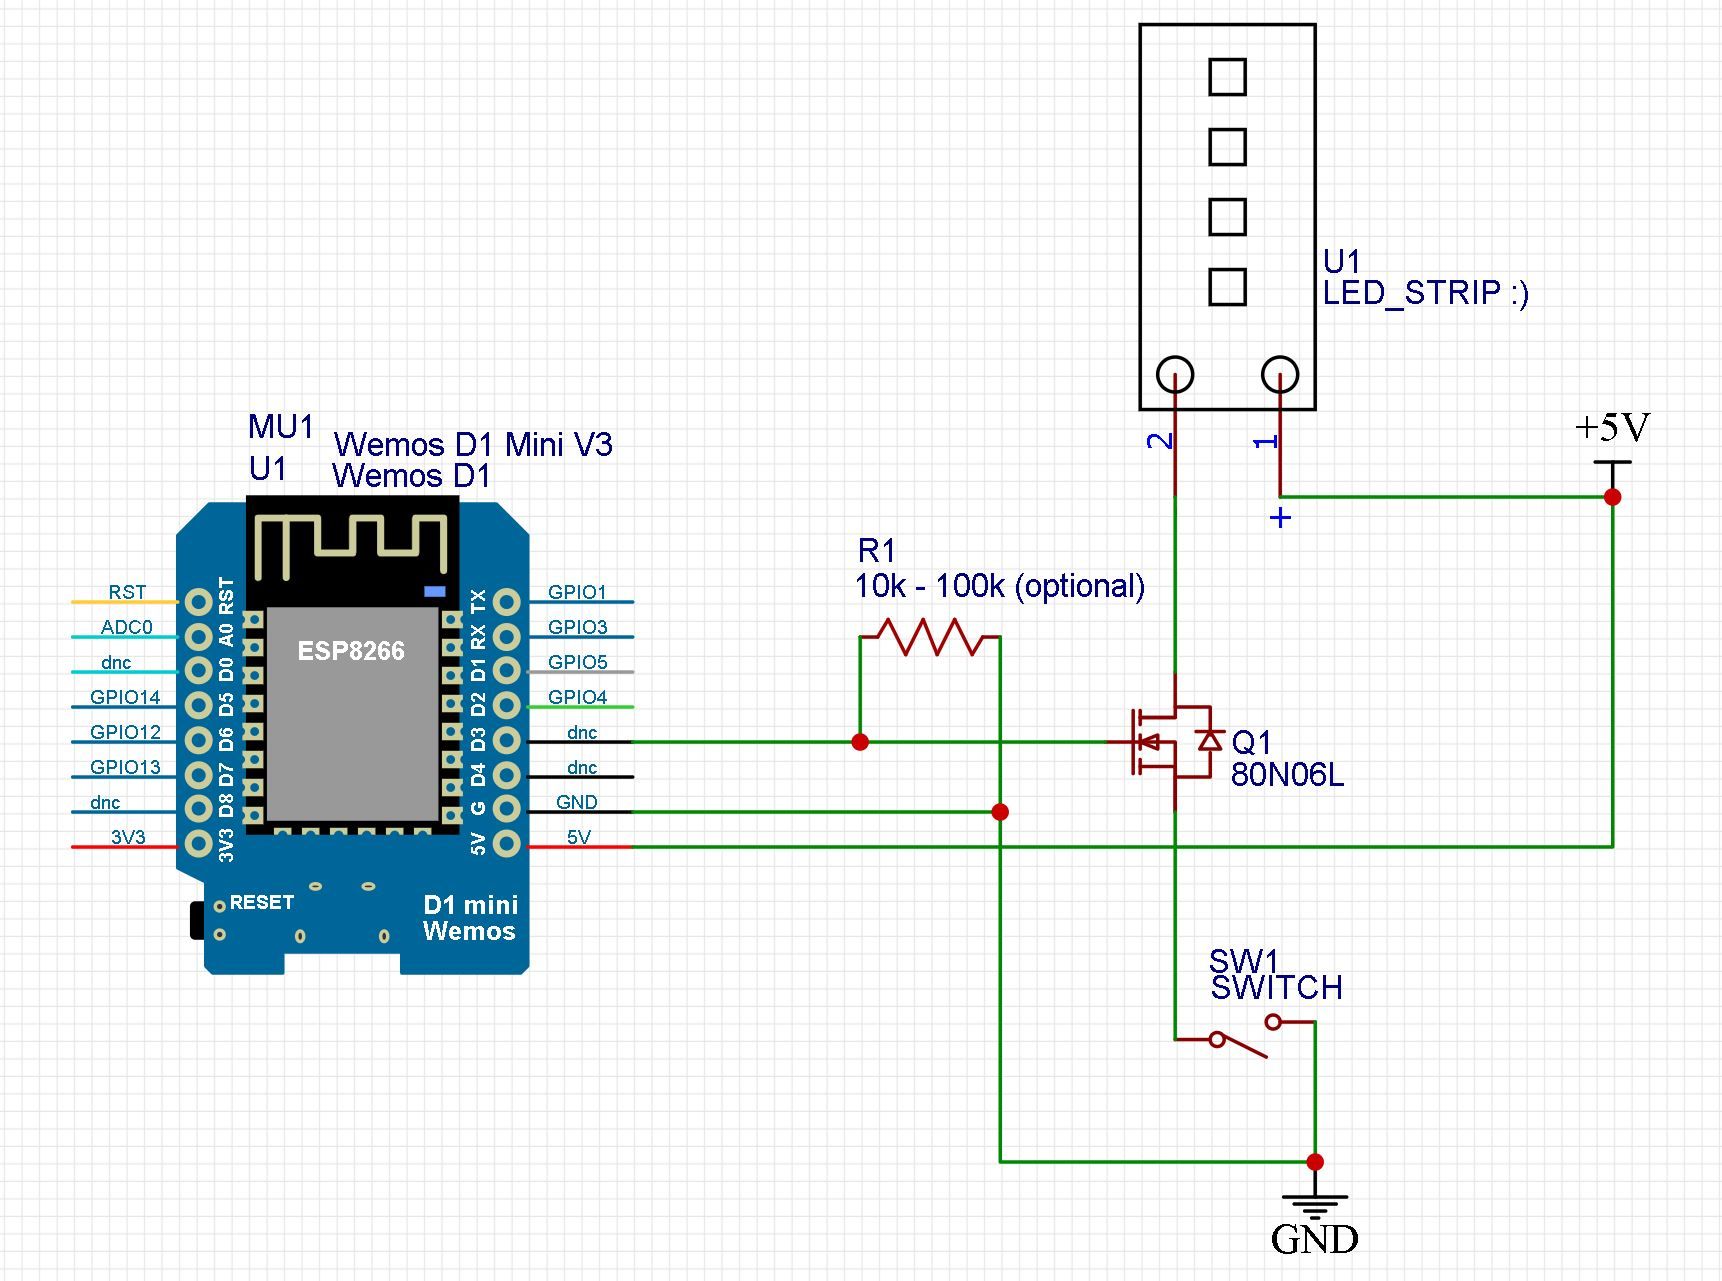 Schematic diagram using a 2-pin rocket switch.